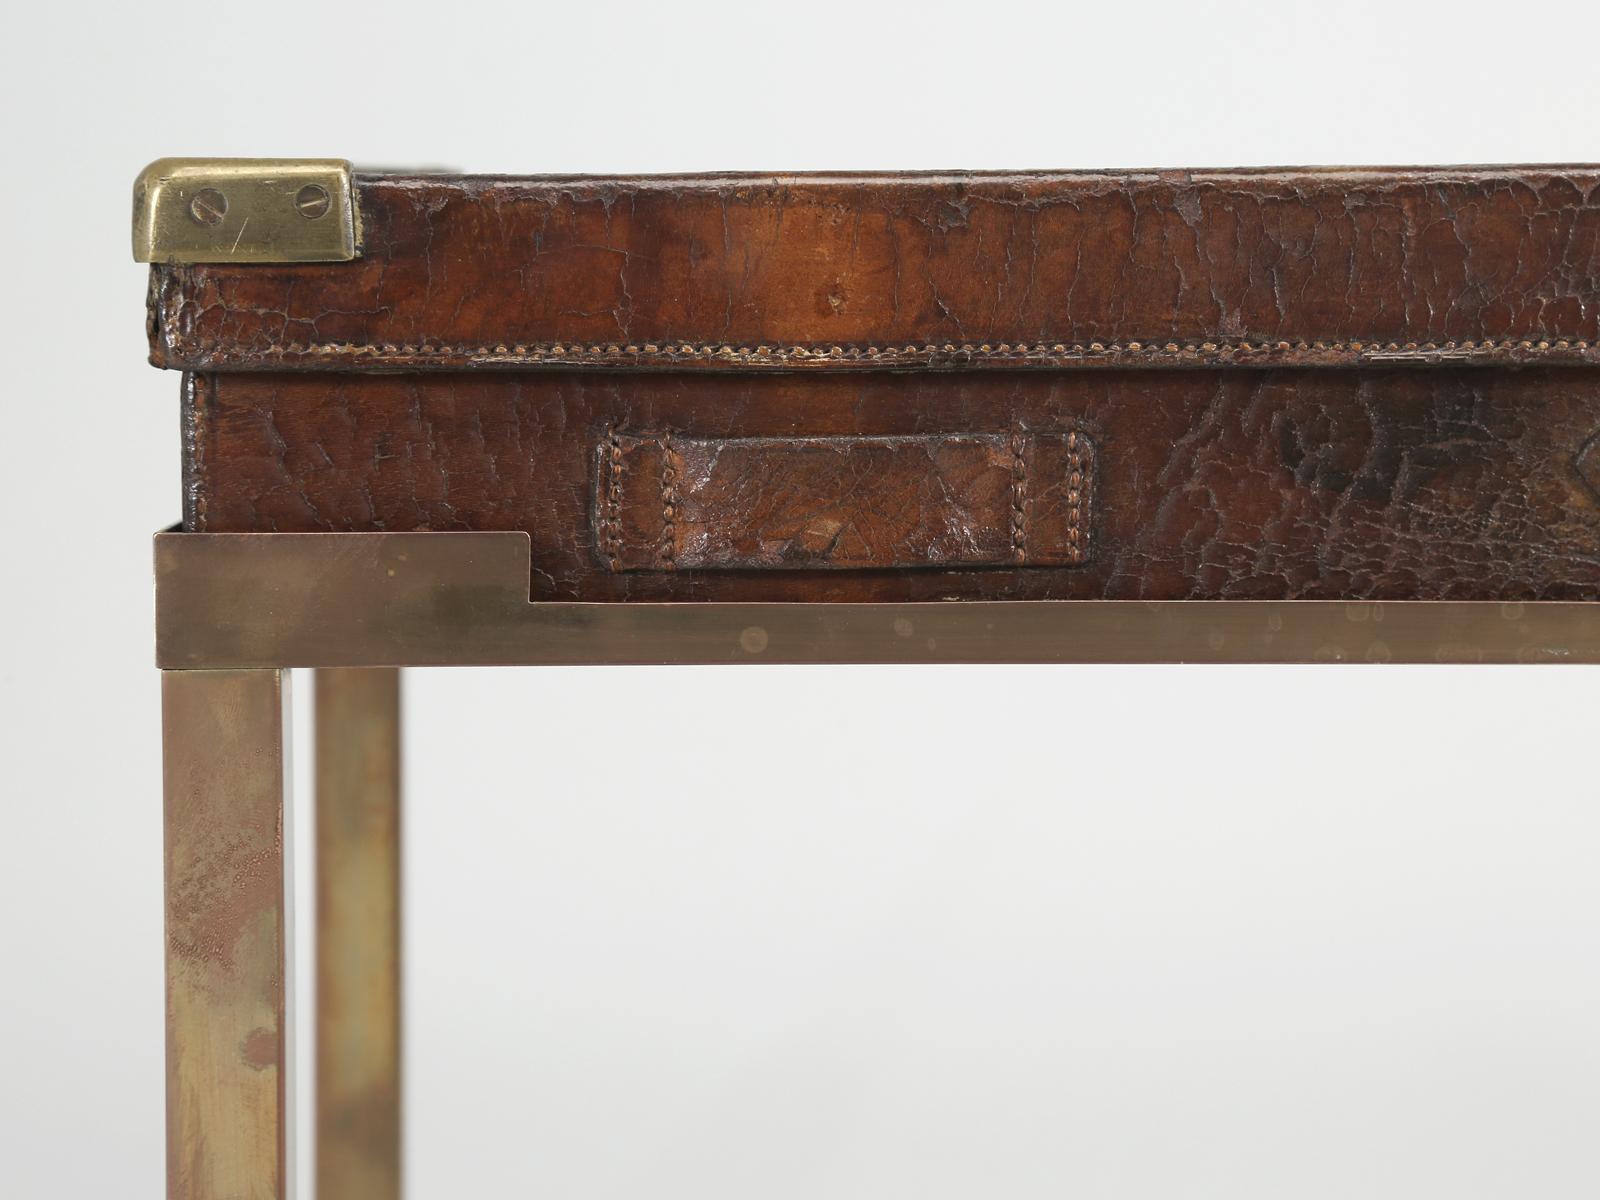 Antique William and Evans Leather Gun Case End Table with Brass Legs, c1900-1920 For Sale 7